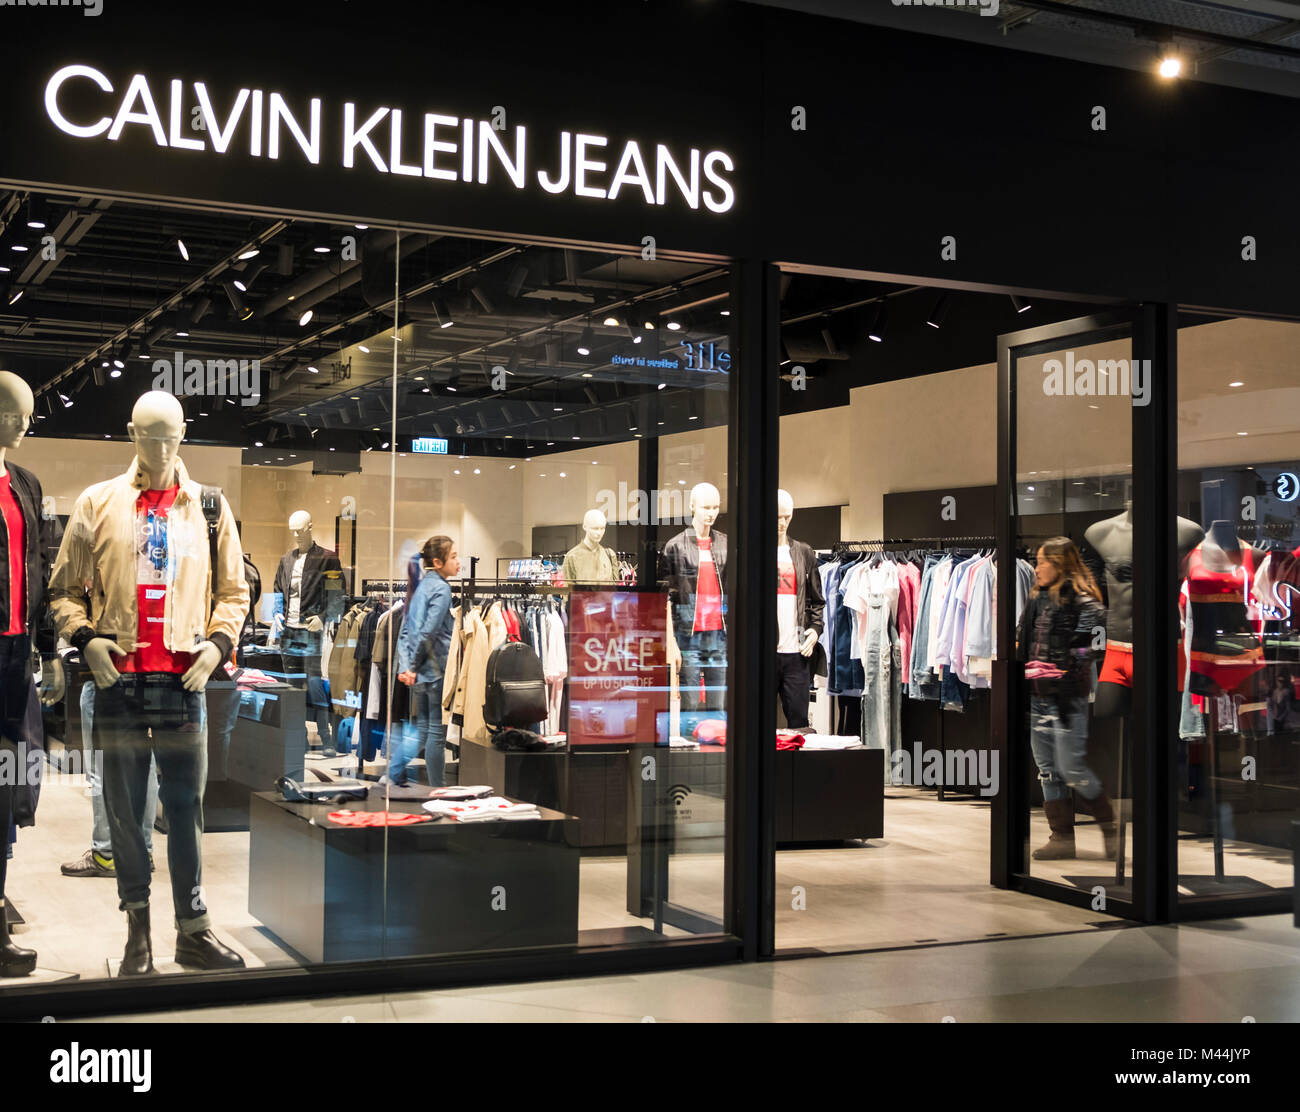 Hong Kong - FEBRUARY 3, 2018: Calvin Klein Jeans store in Hong Kong; The  Warnaco Group maintains Calvin Klein Jeans and corresponding outlet stores  ca Stock Photo - Alamy